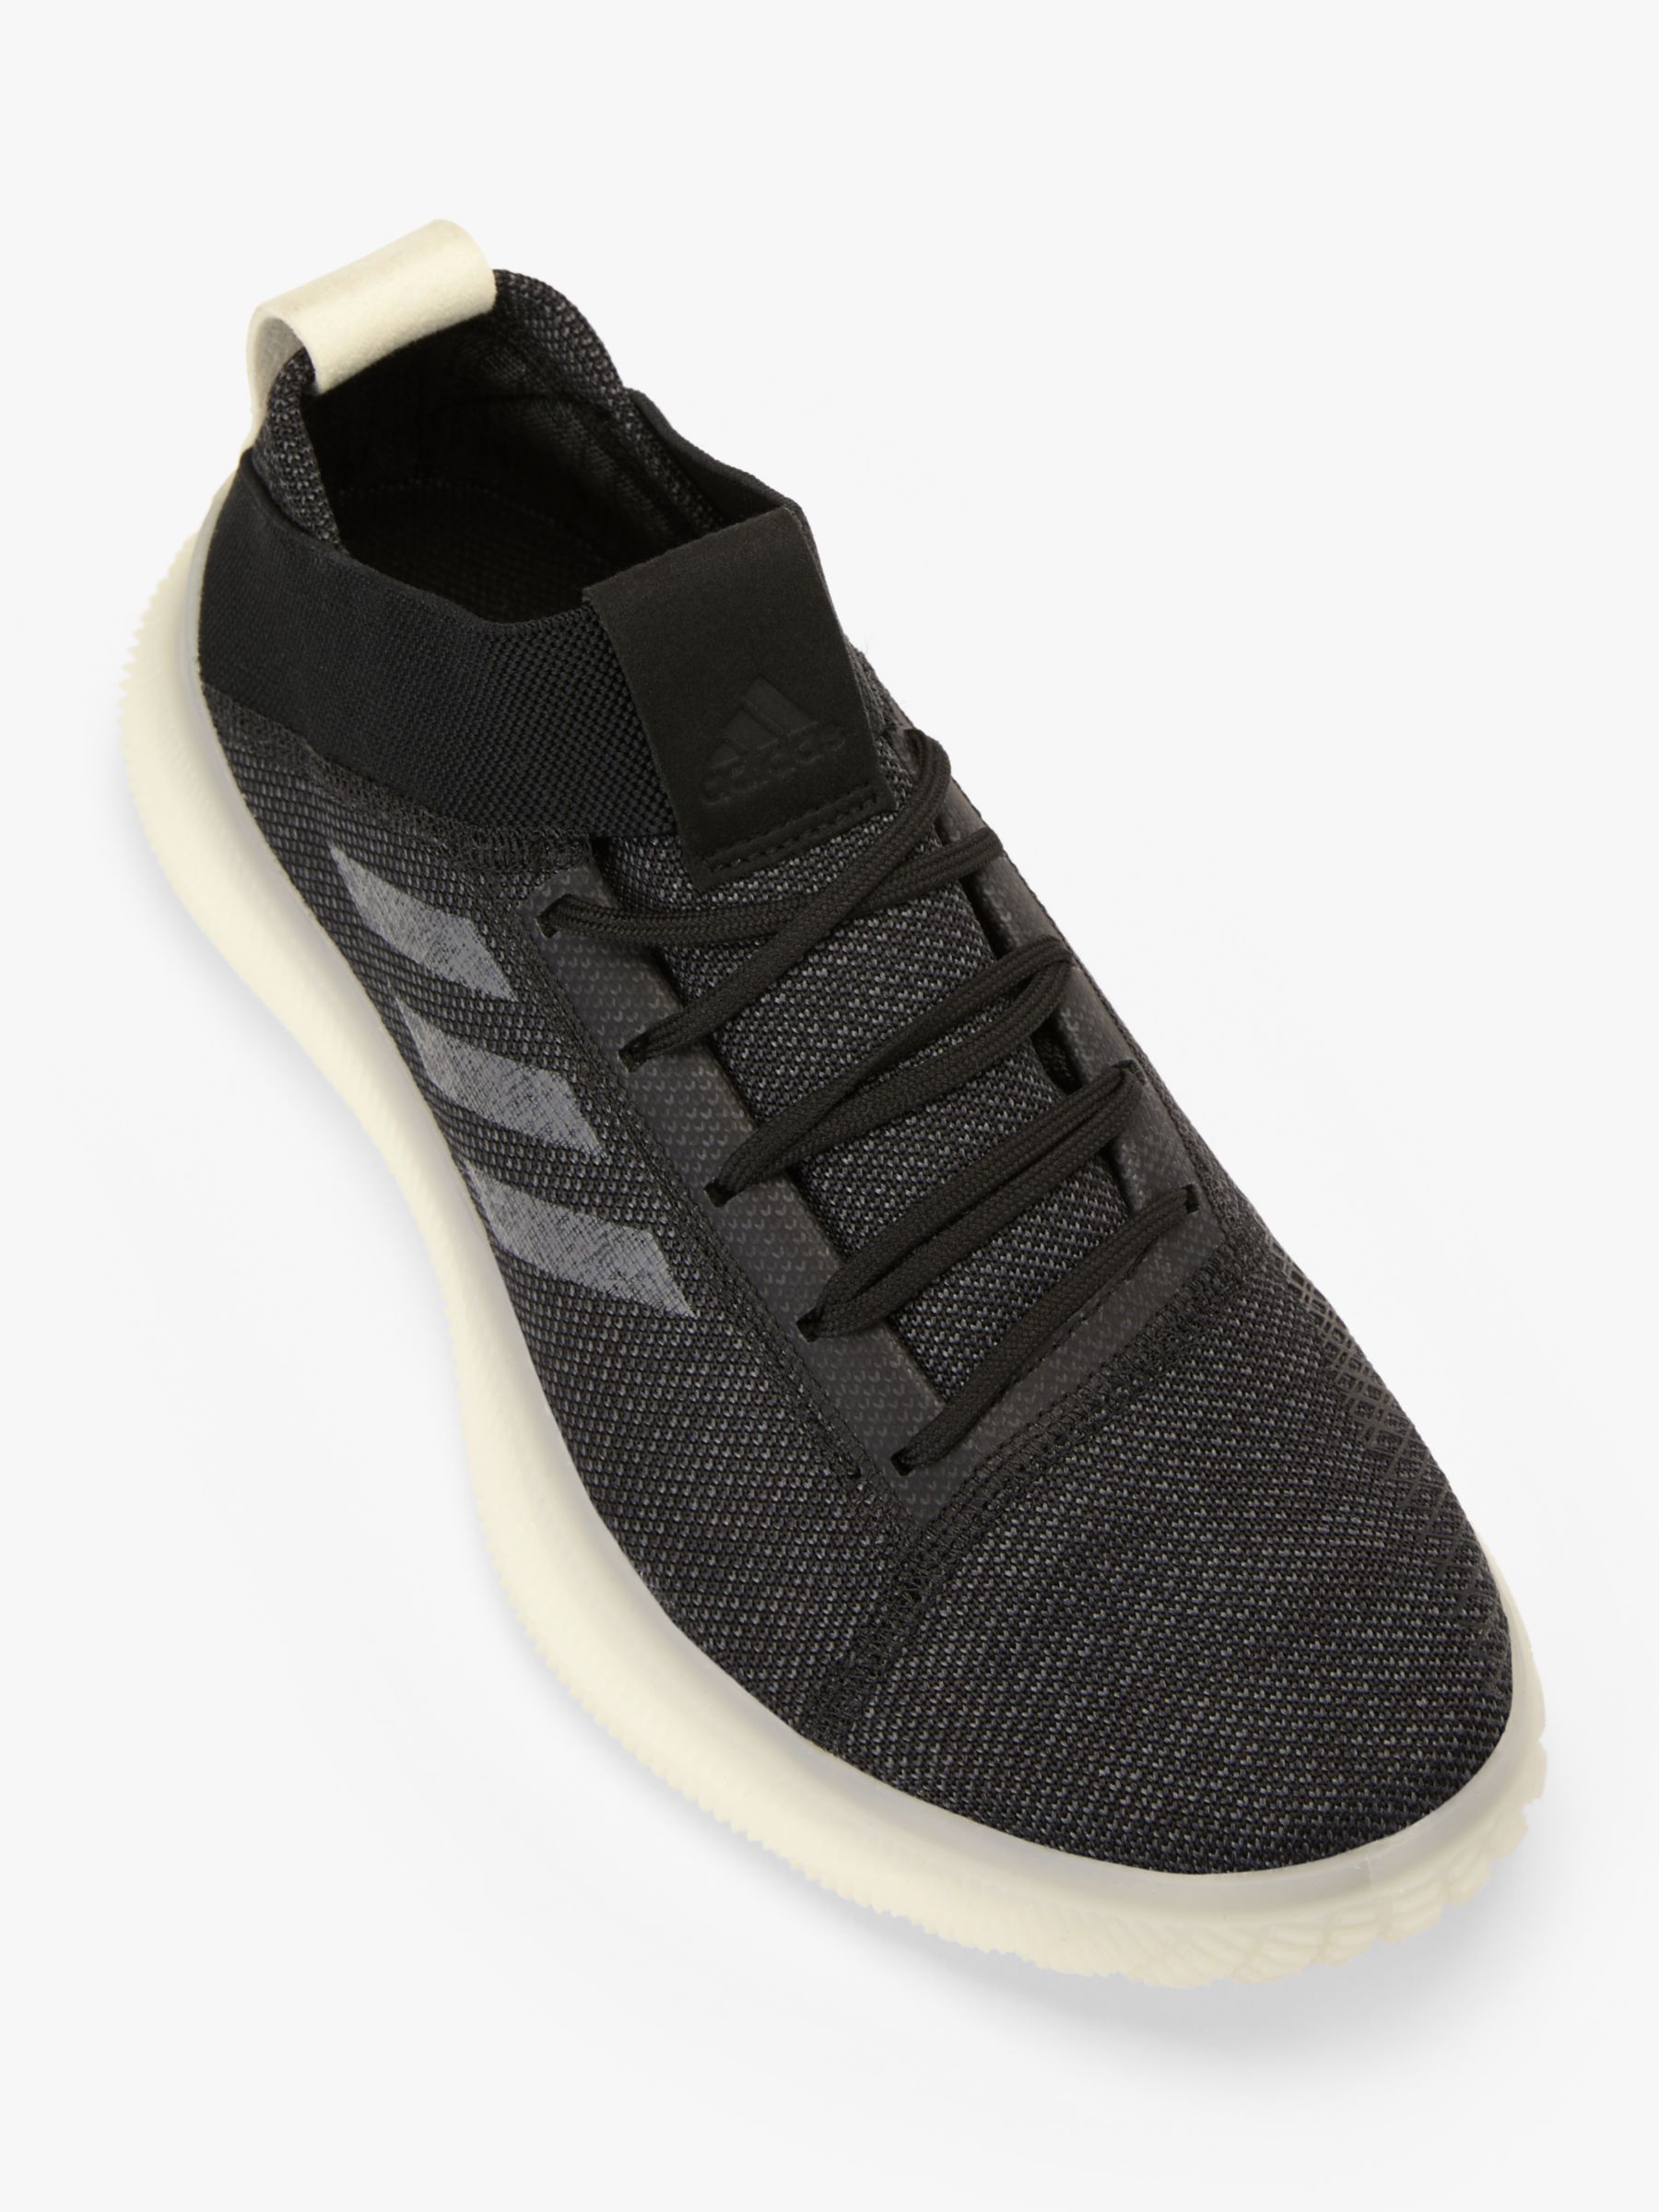 adidas pure boost trainer mens